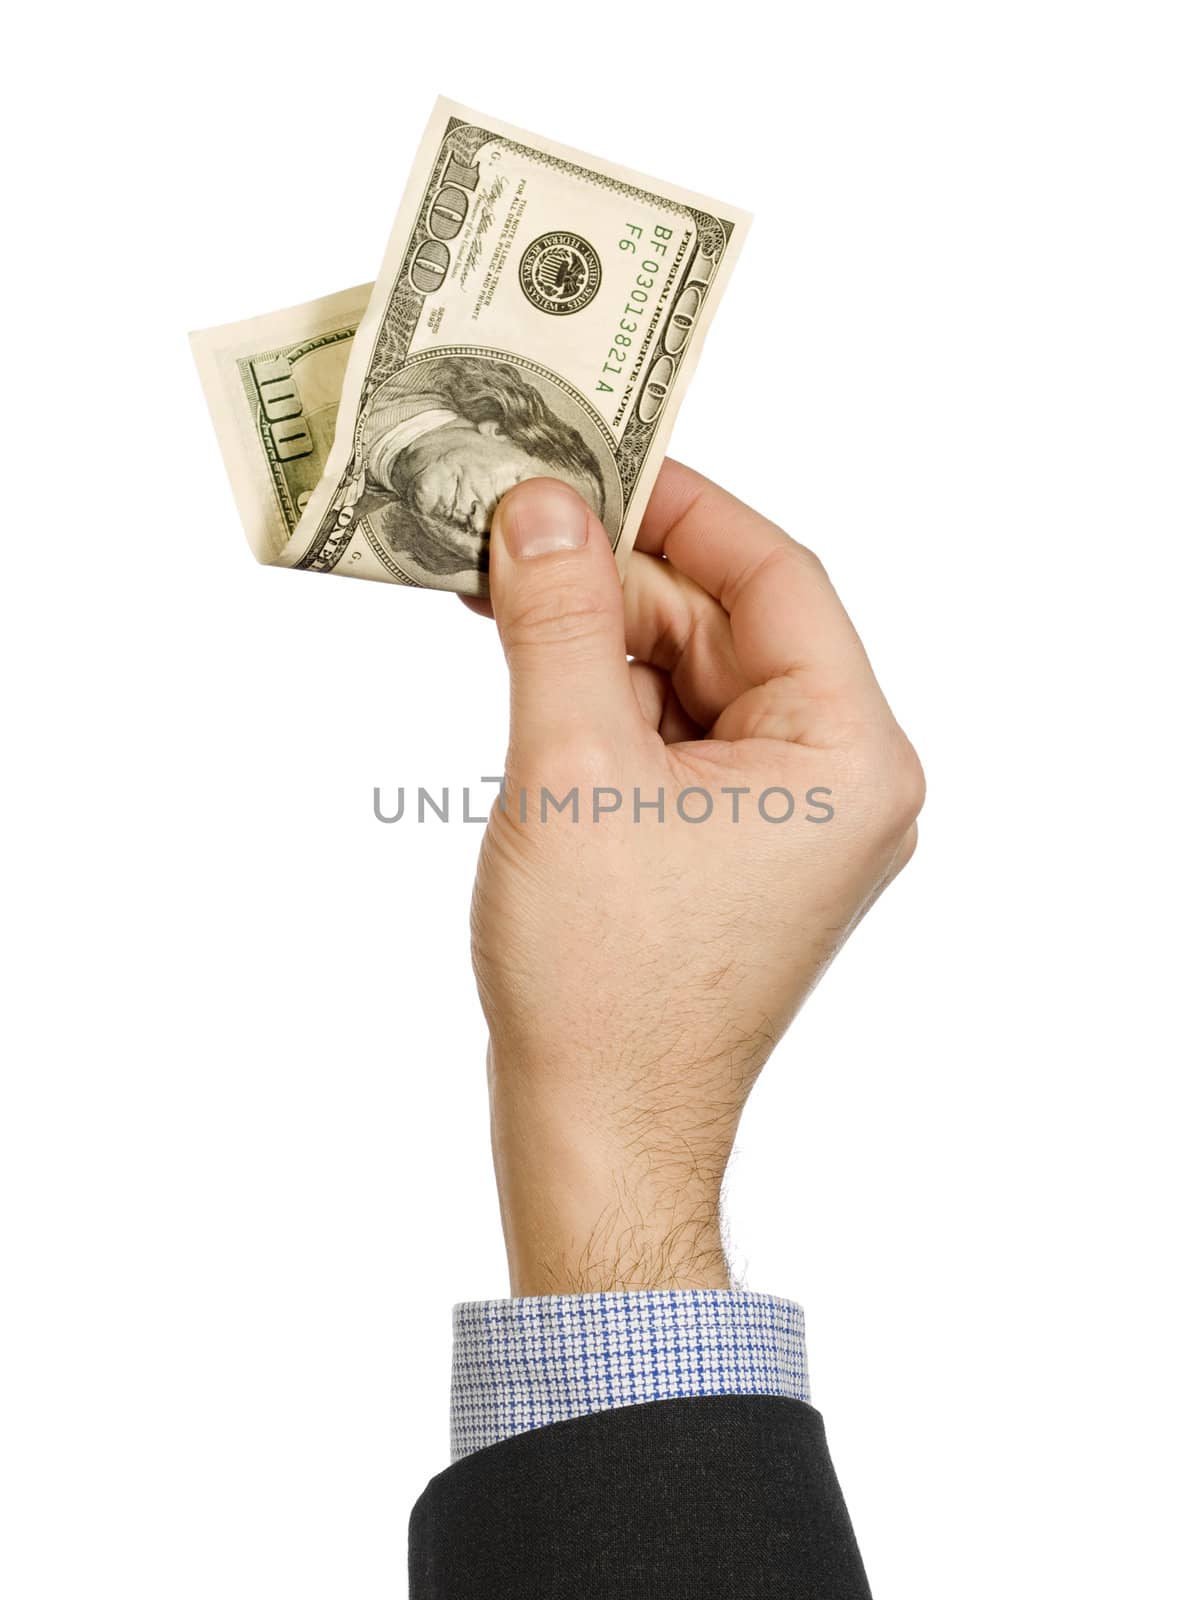 A man's hand holding a one hundred dollar bill.